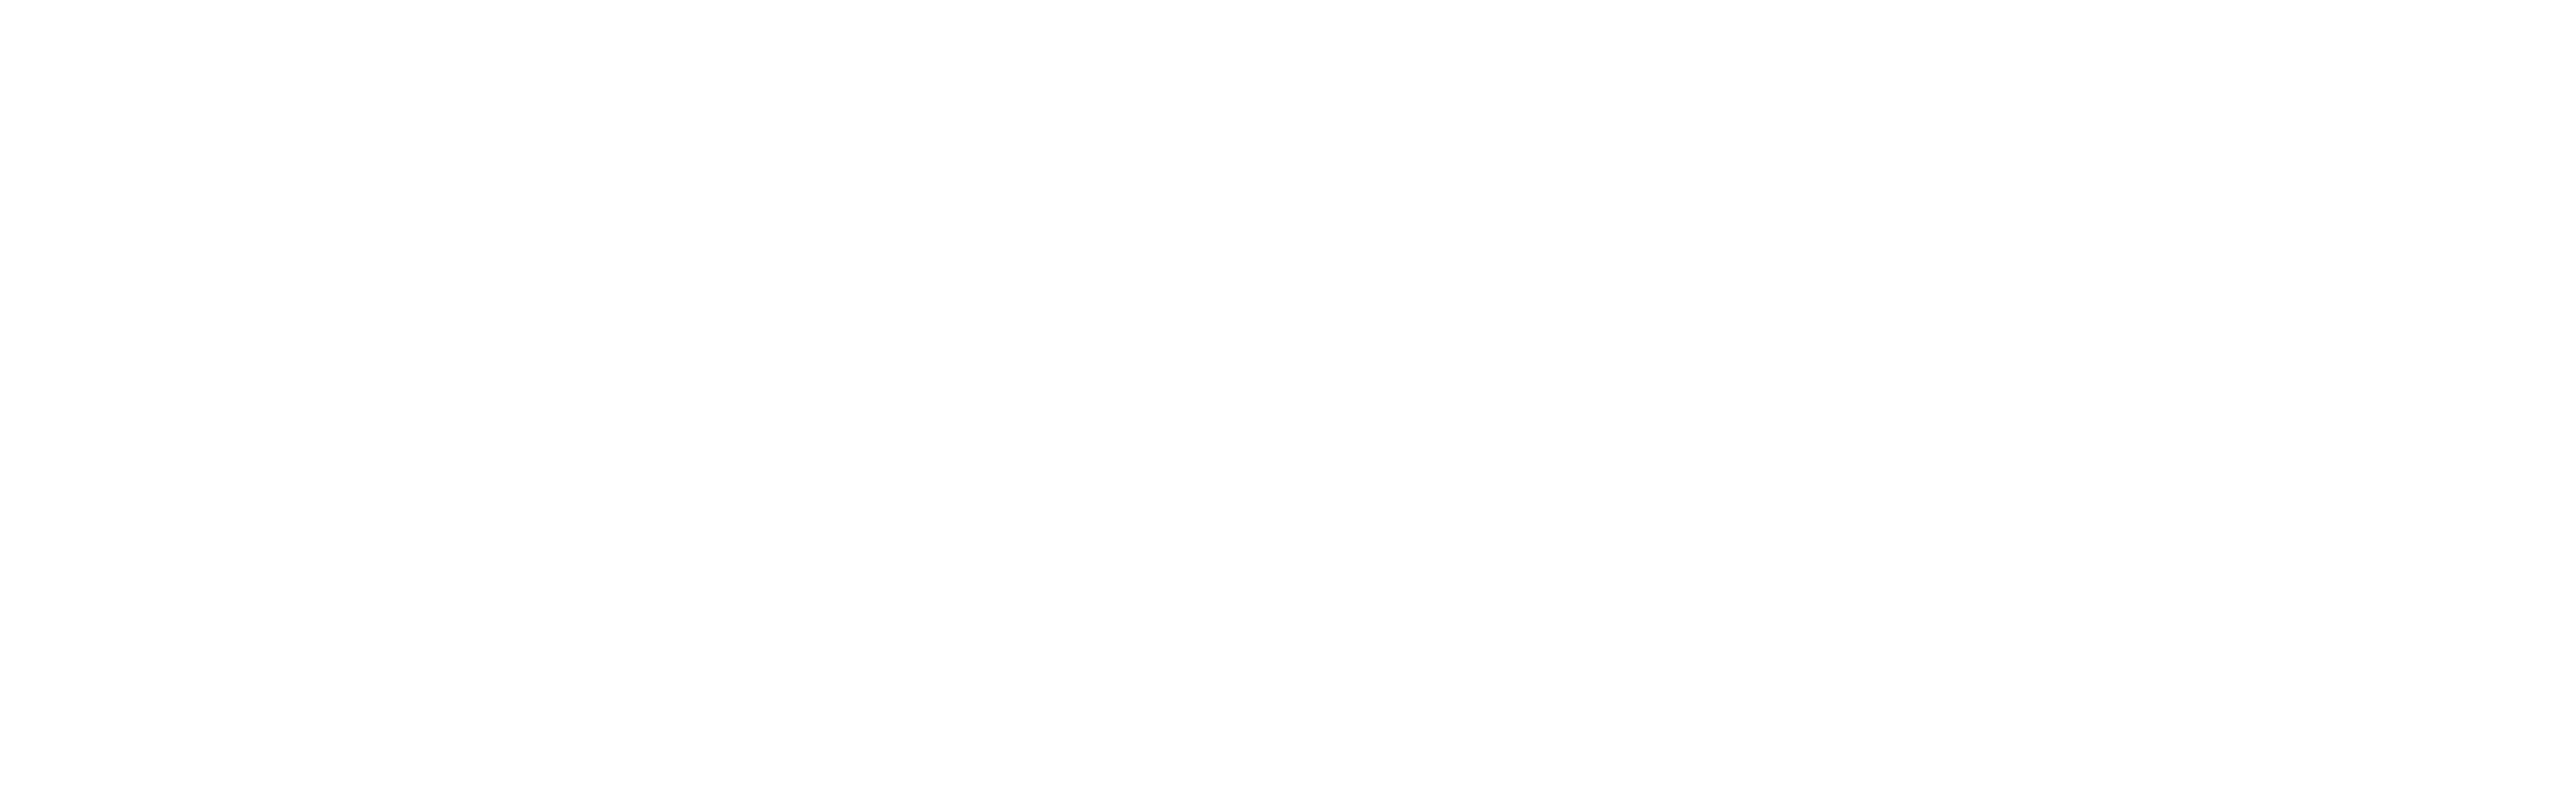 The Rough Sleepers Support Service Newham logo in white